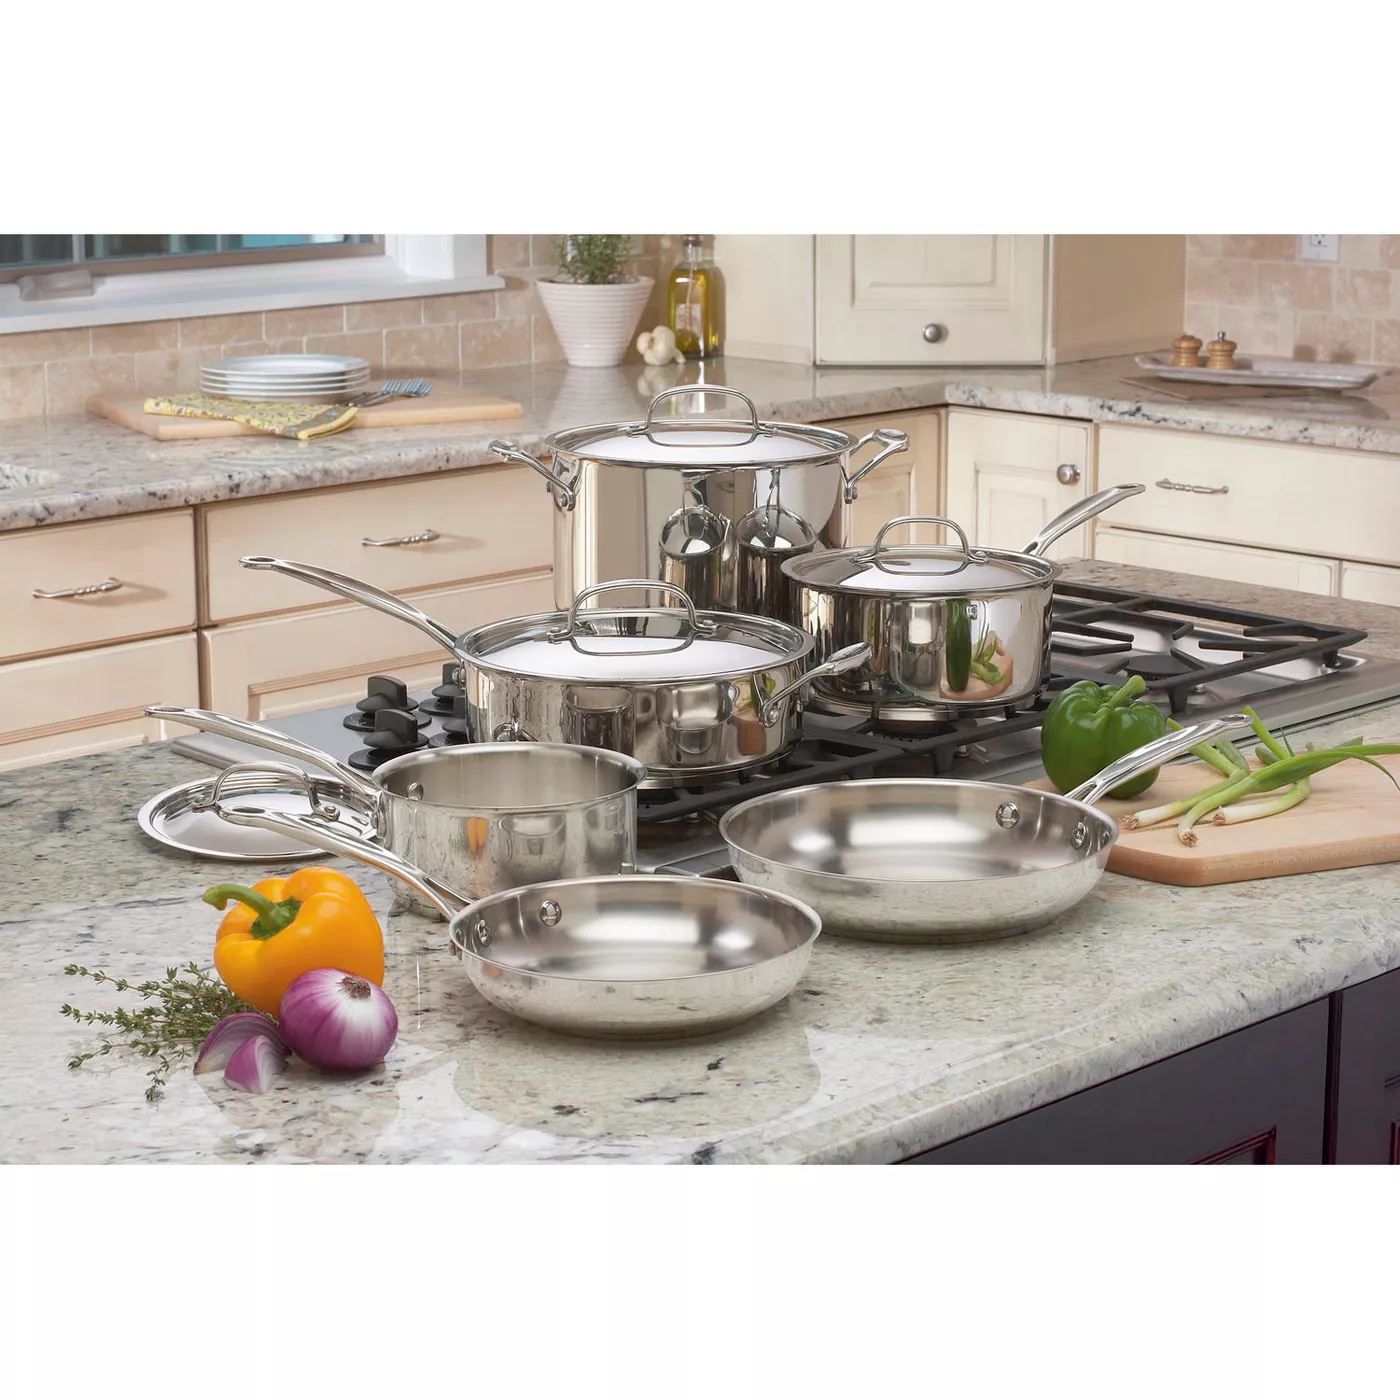 Cuisinart Chef's Classic 10pc Stainless Steel Cookware Set - 77-10 - image 1 of 4